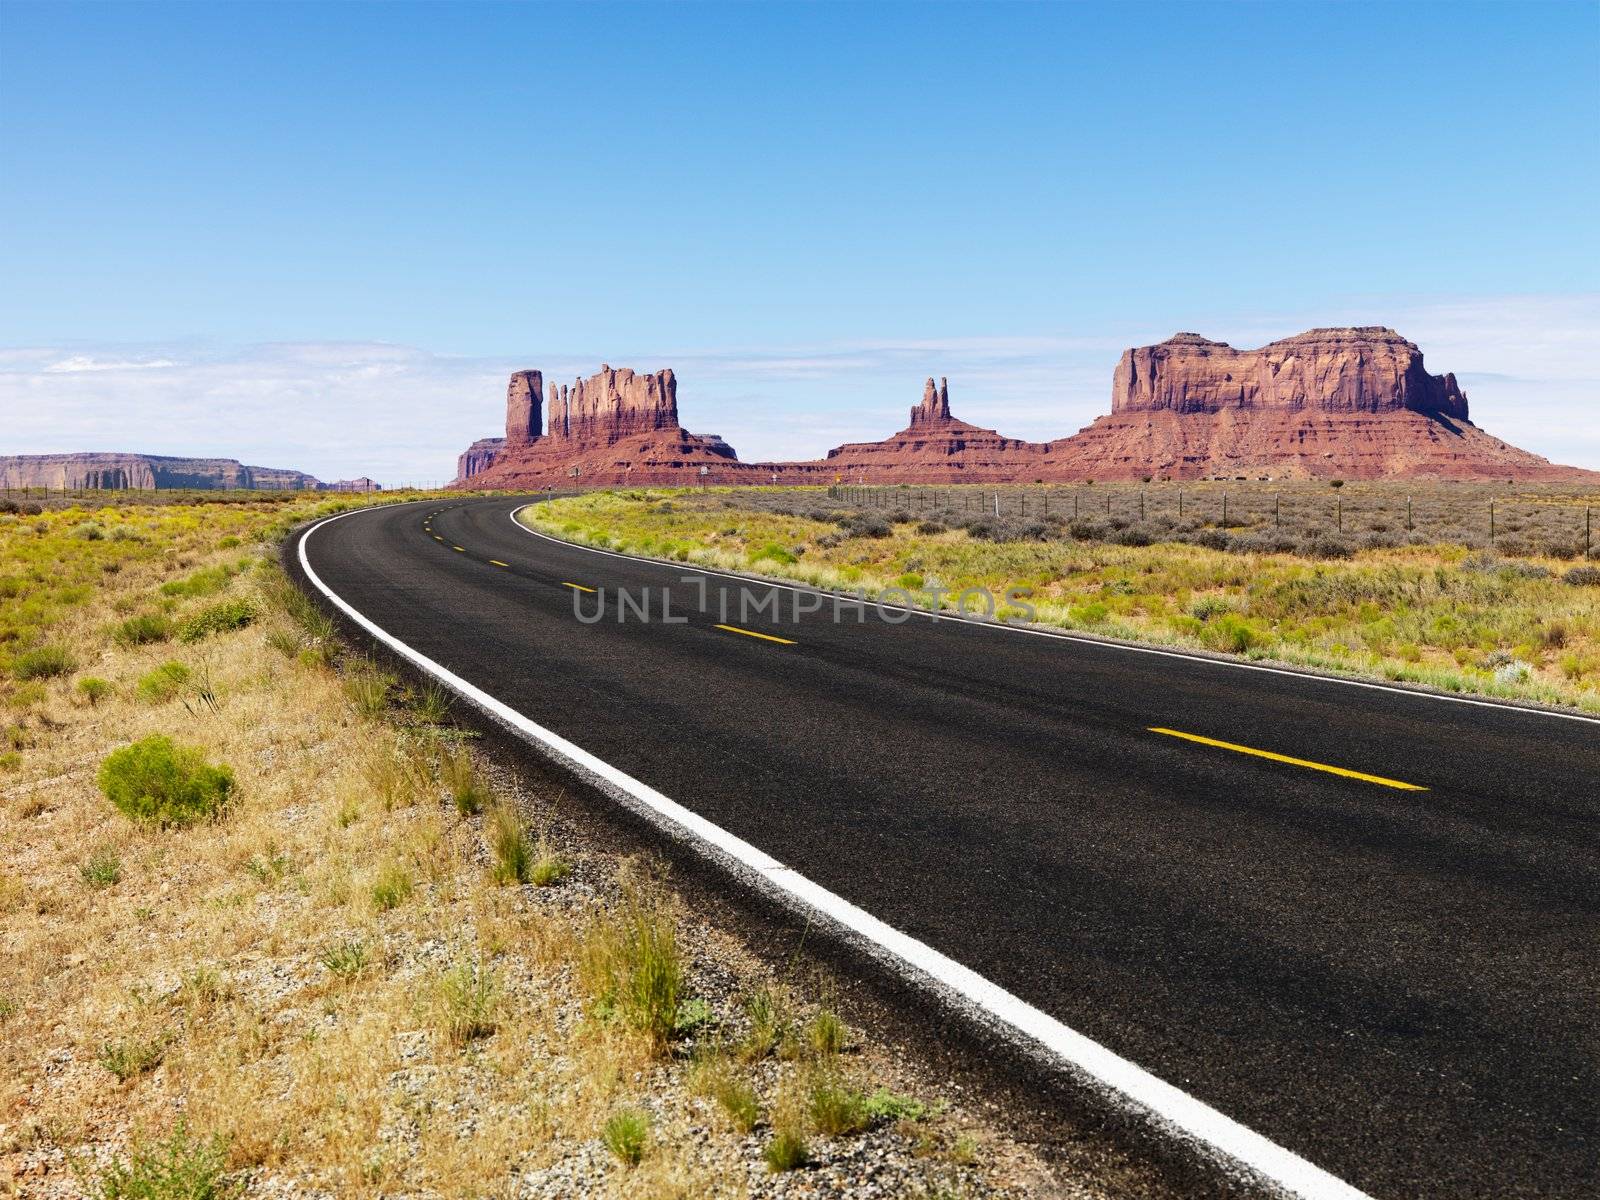 Road in scenic desert landscape with mesa and mountains.